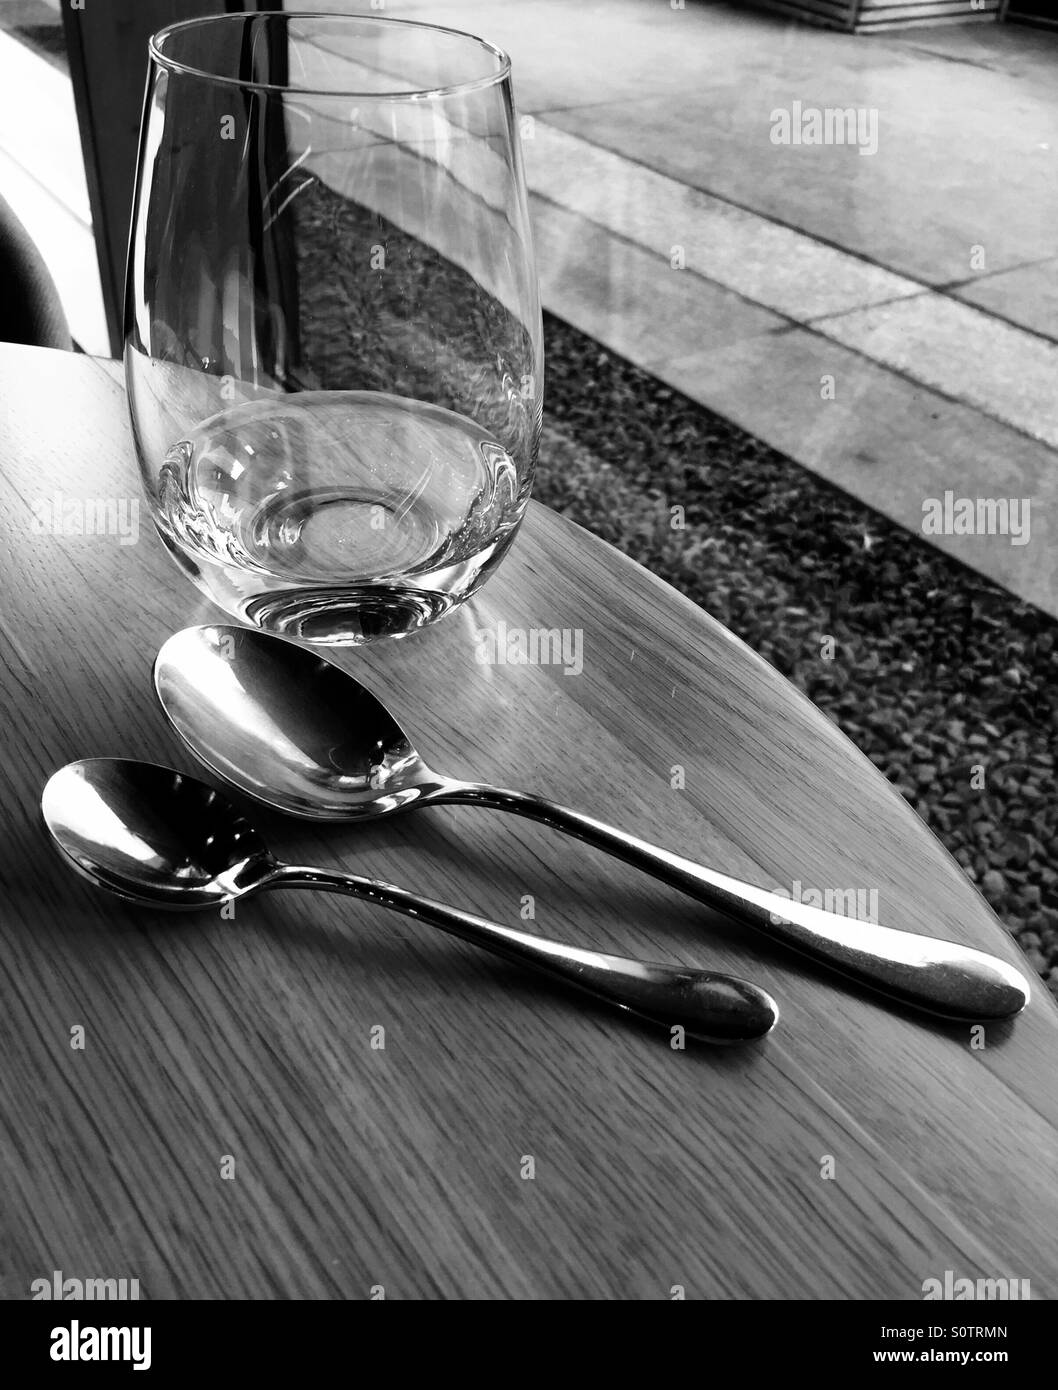 An empty glass on the table with spoons Stock Photo